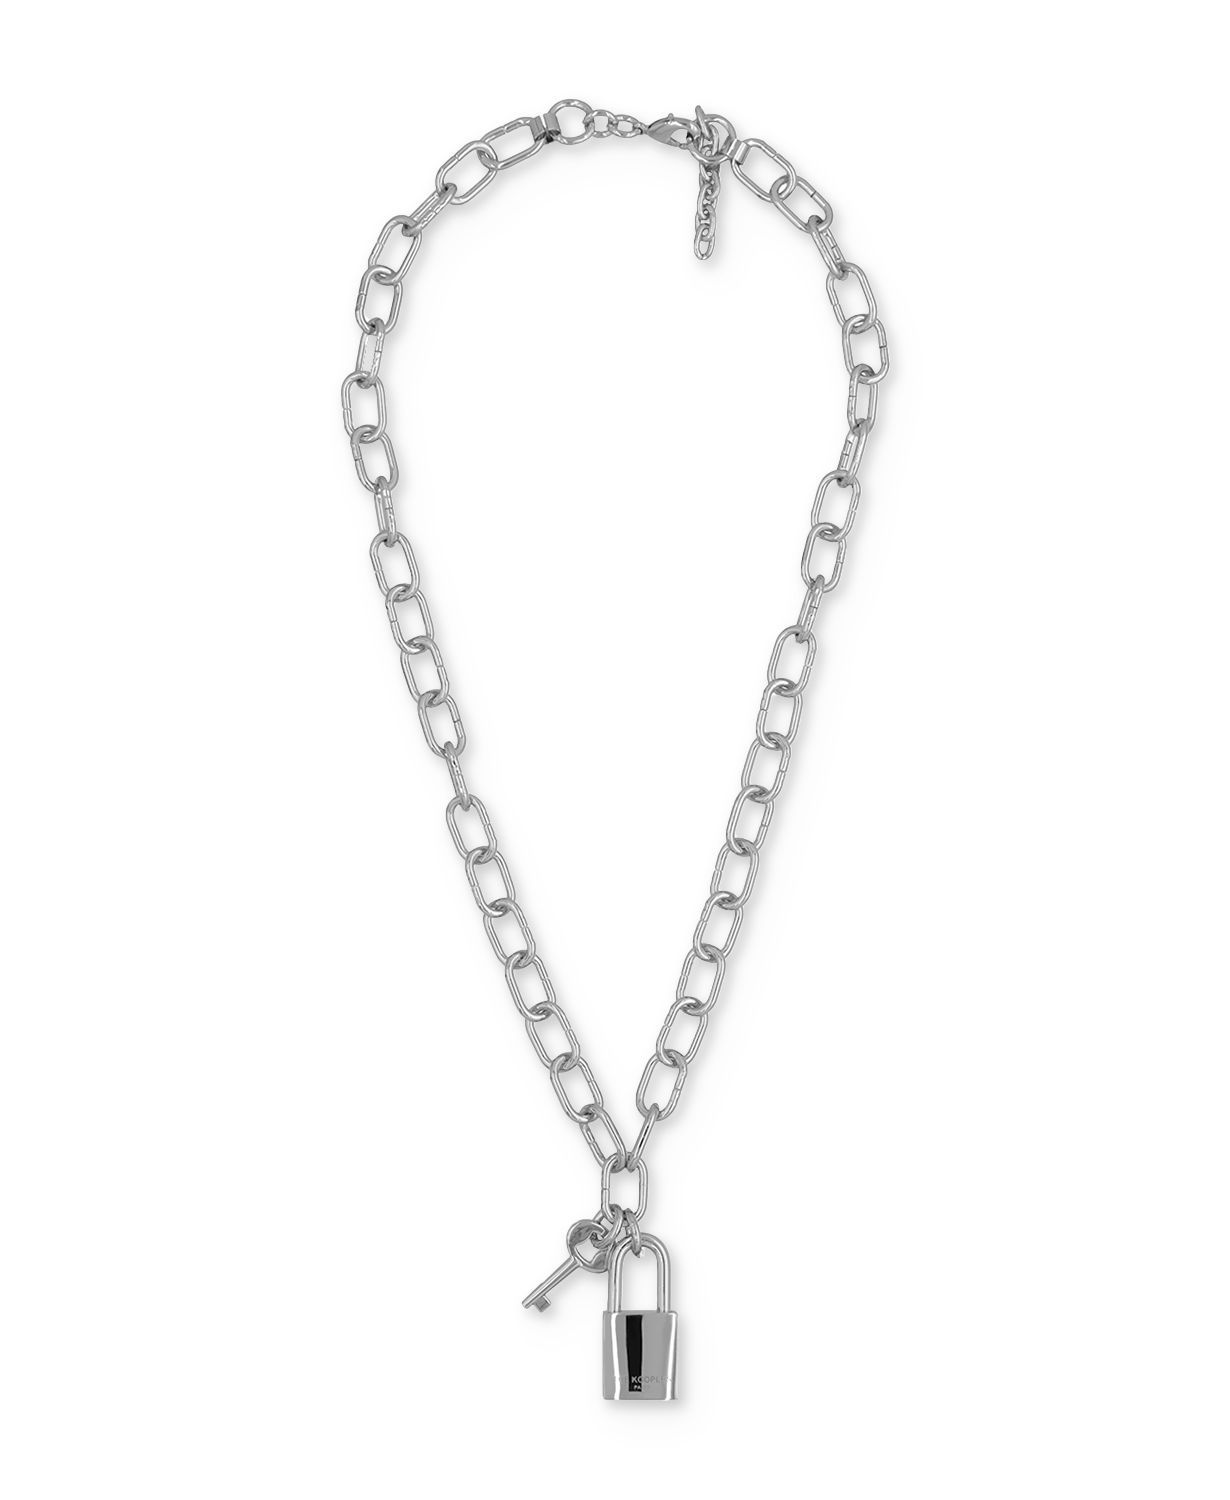 Padlock And Key Chain Necklace